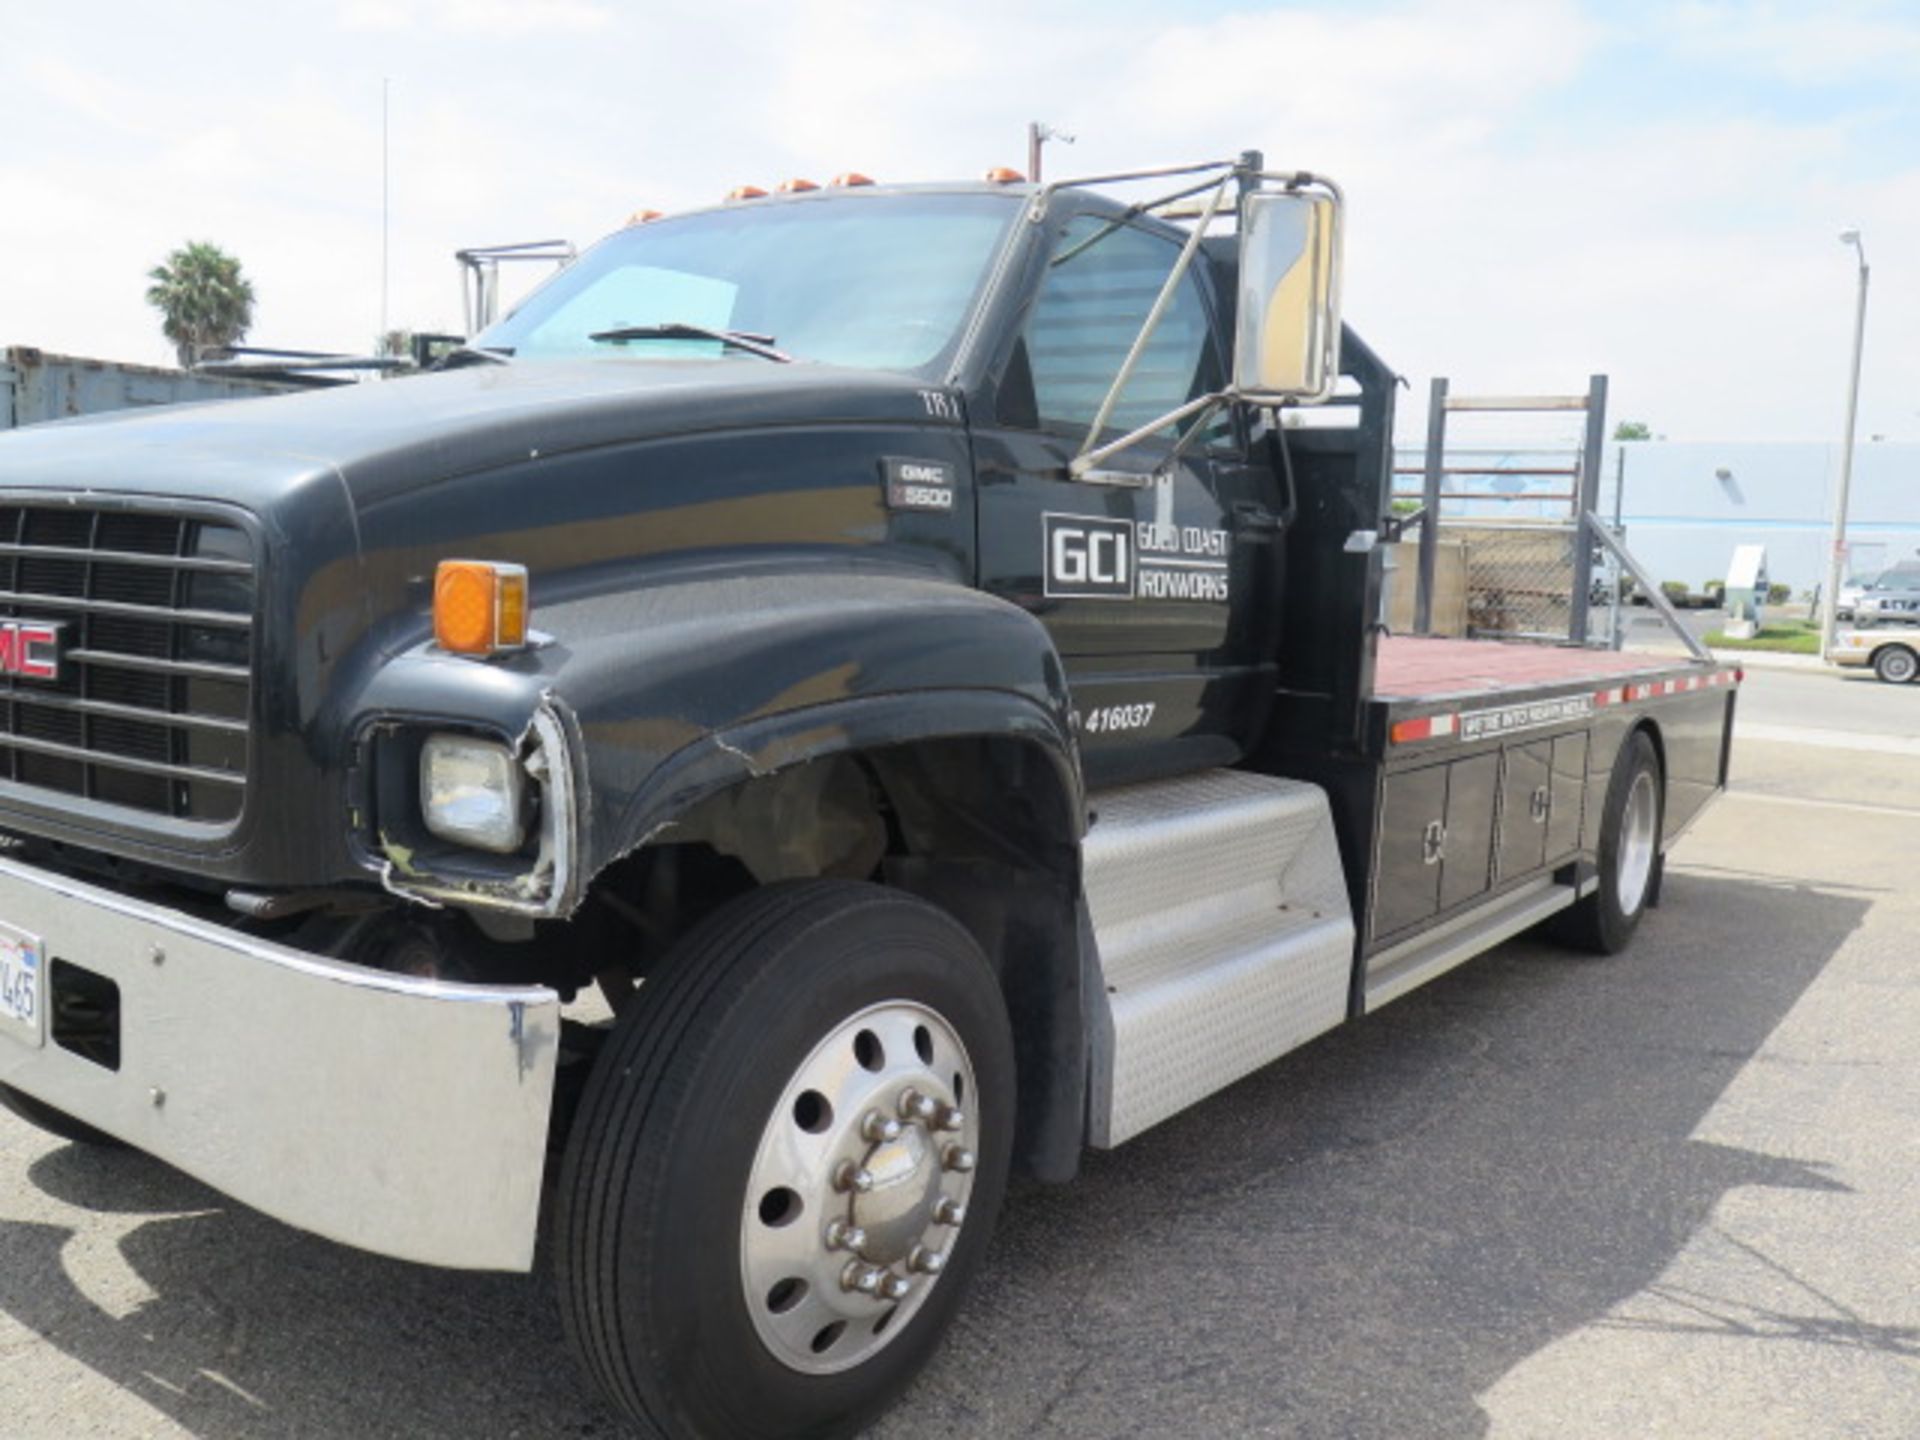 1998 GMC C5500 15’ Flatbed Truck Lisc# 7X17465 w/ 6.0L LPG Engine, 5-Speed Manual Trans, 26,000 - Image 2 of 20